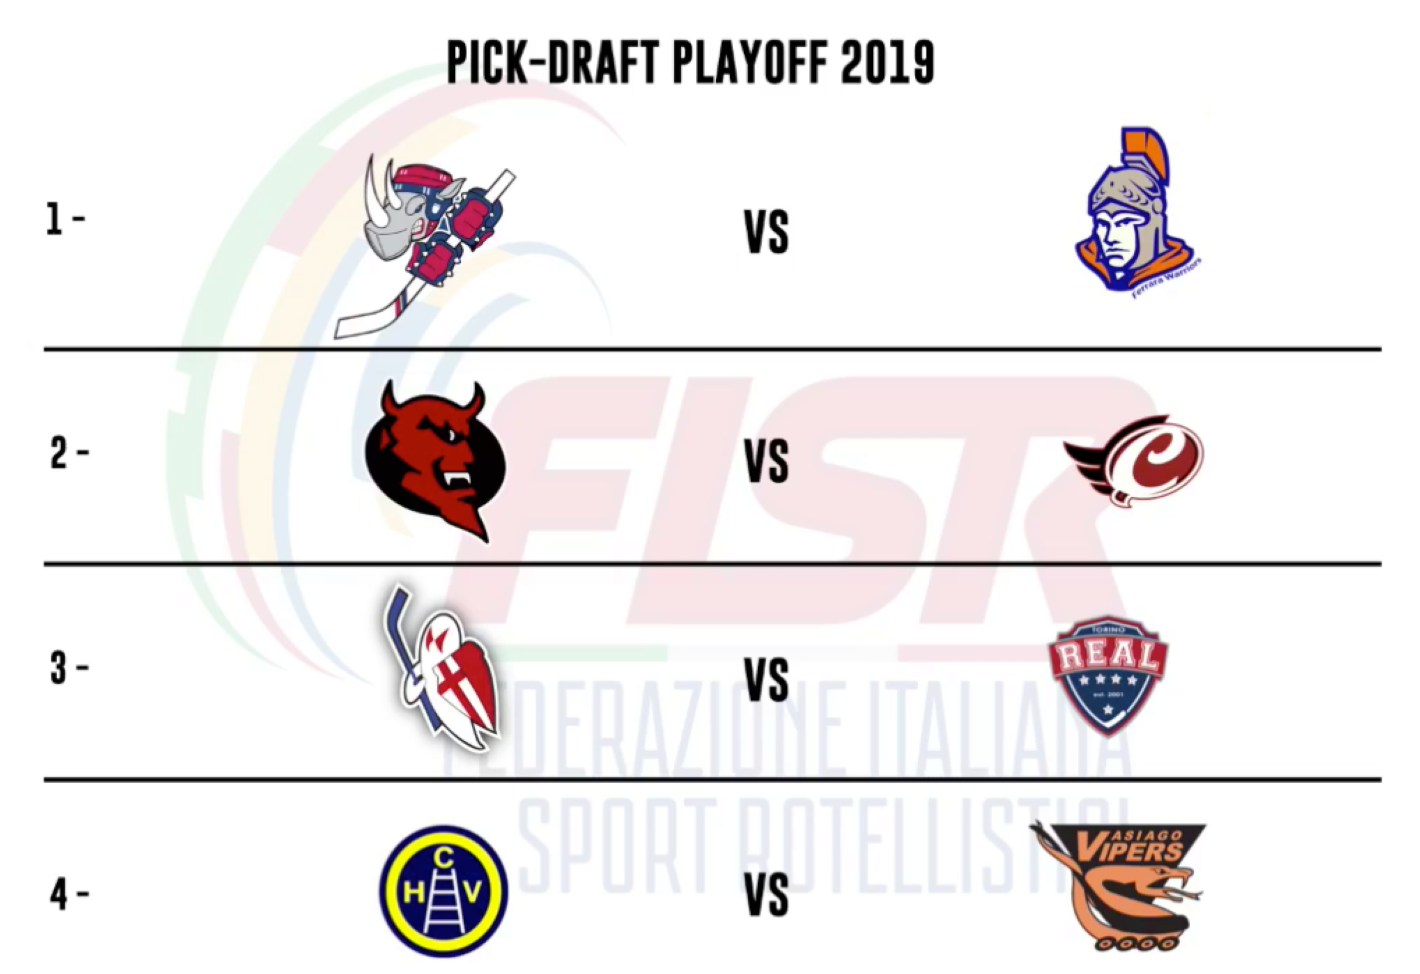 images/Pick-Draft_PlayOff_SerieA1_HIL_20182019.png